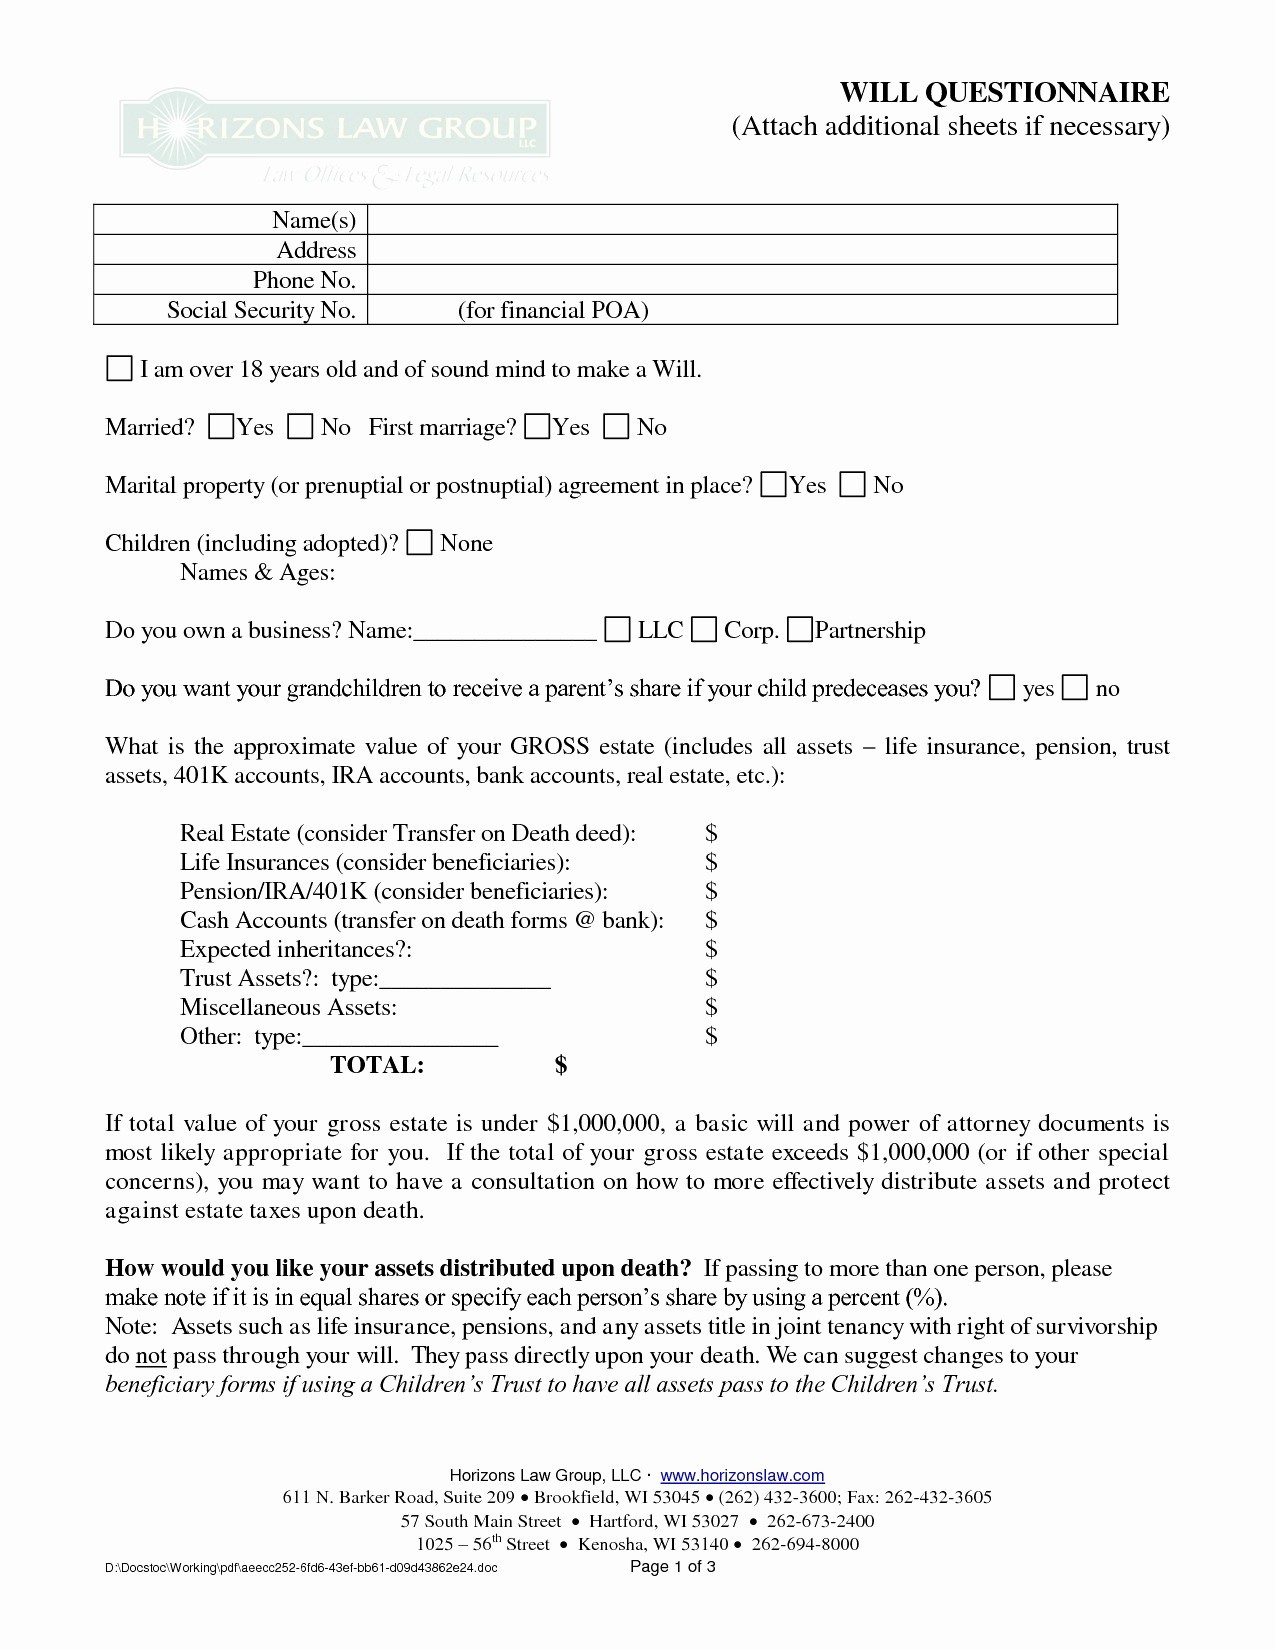 Wisconsin Marital Property Agreement Form New Infidelity Contract Document